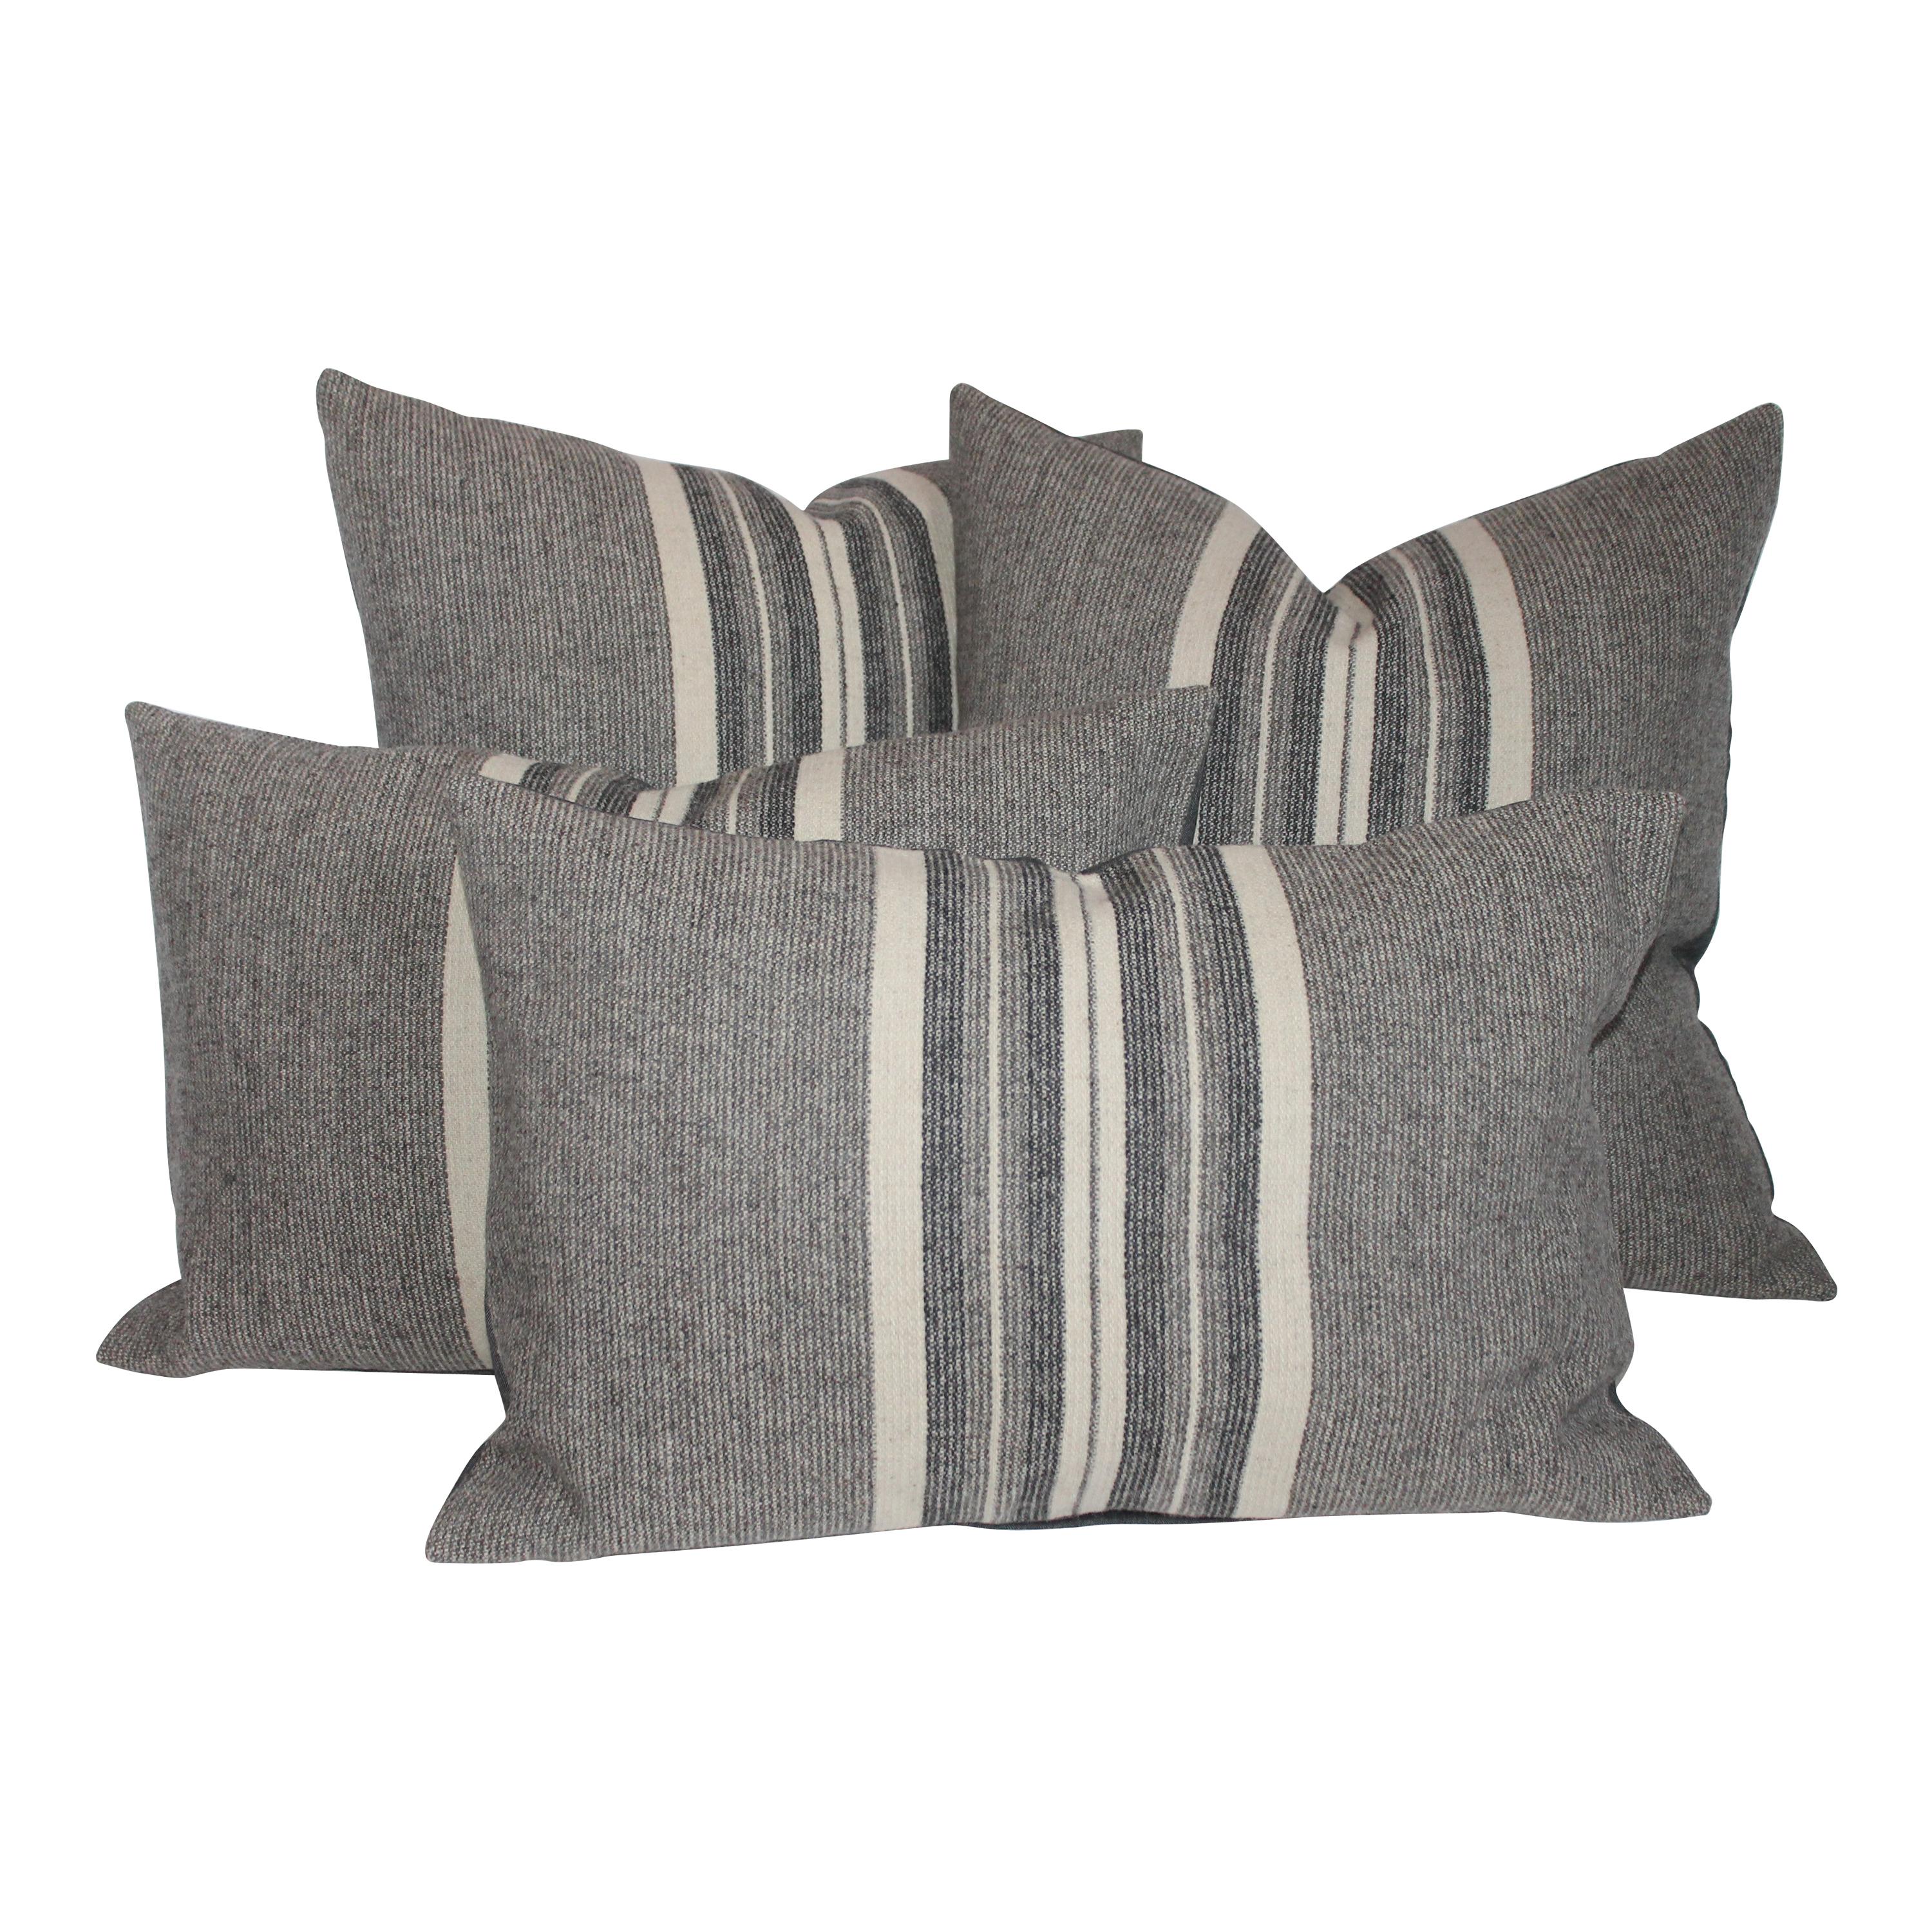 Collection of Two Pairs of Grey Stripe Woven Pillows